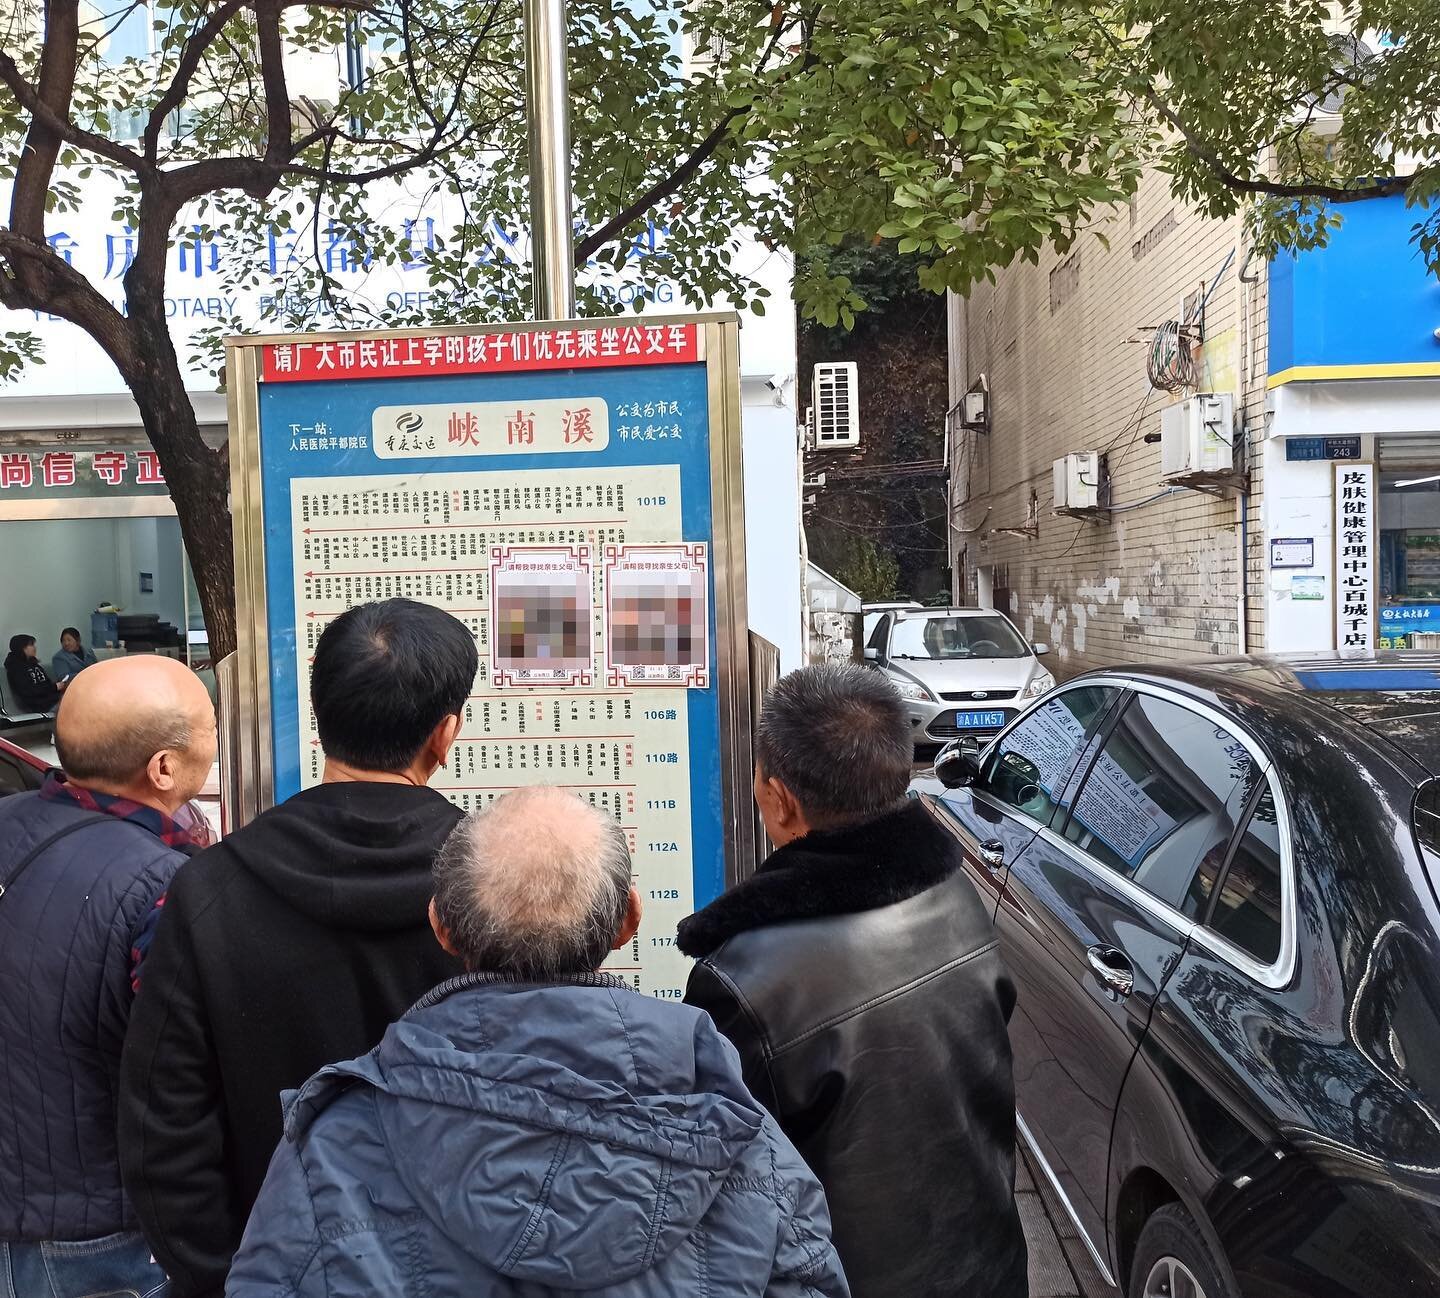 A group of men reading the search posters from our group search last year. Chinese locals are very kind and helpful people! ❤️